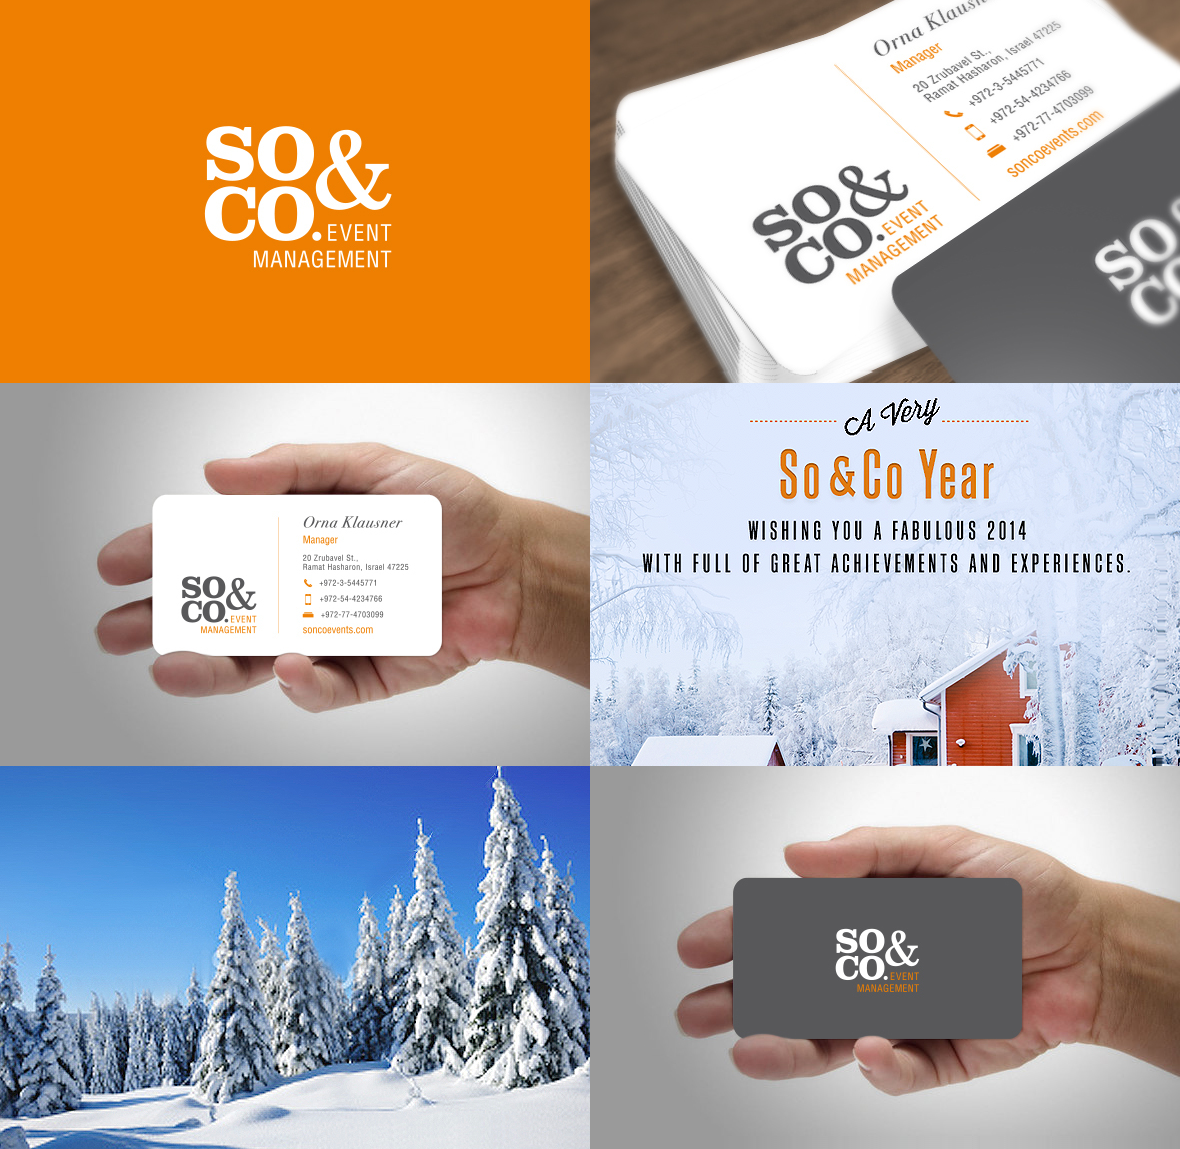 So&Co and Partners